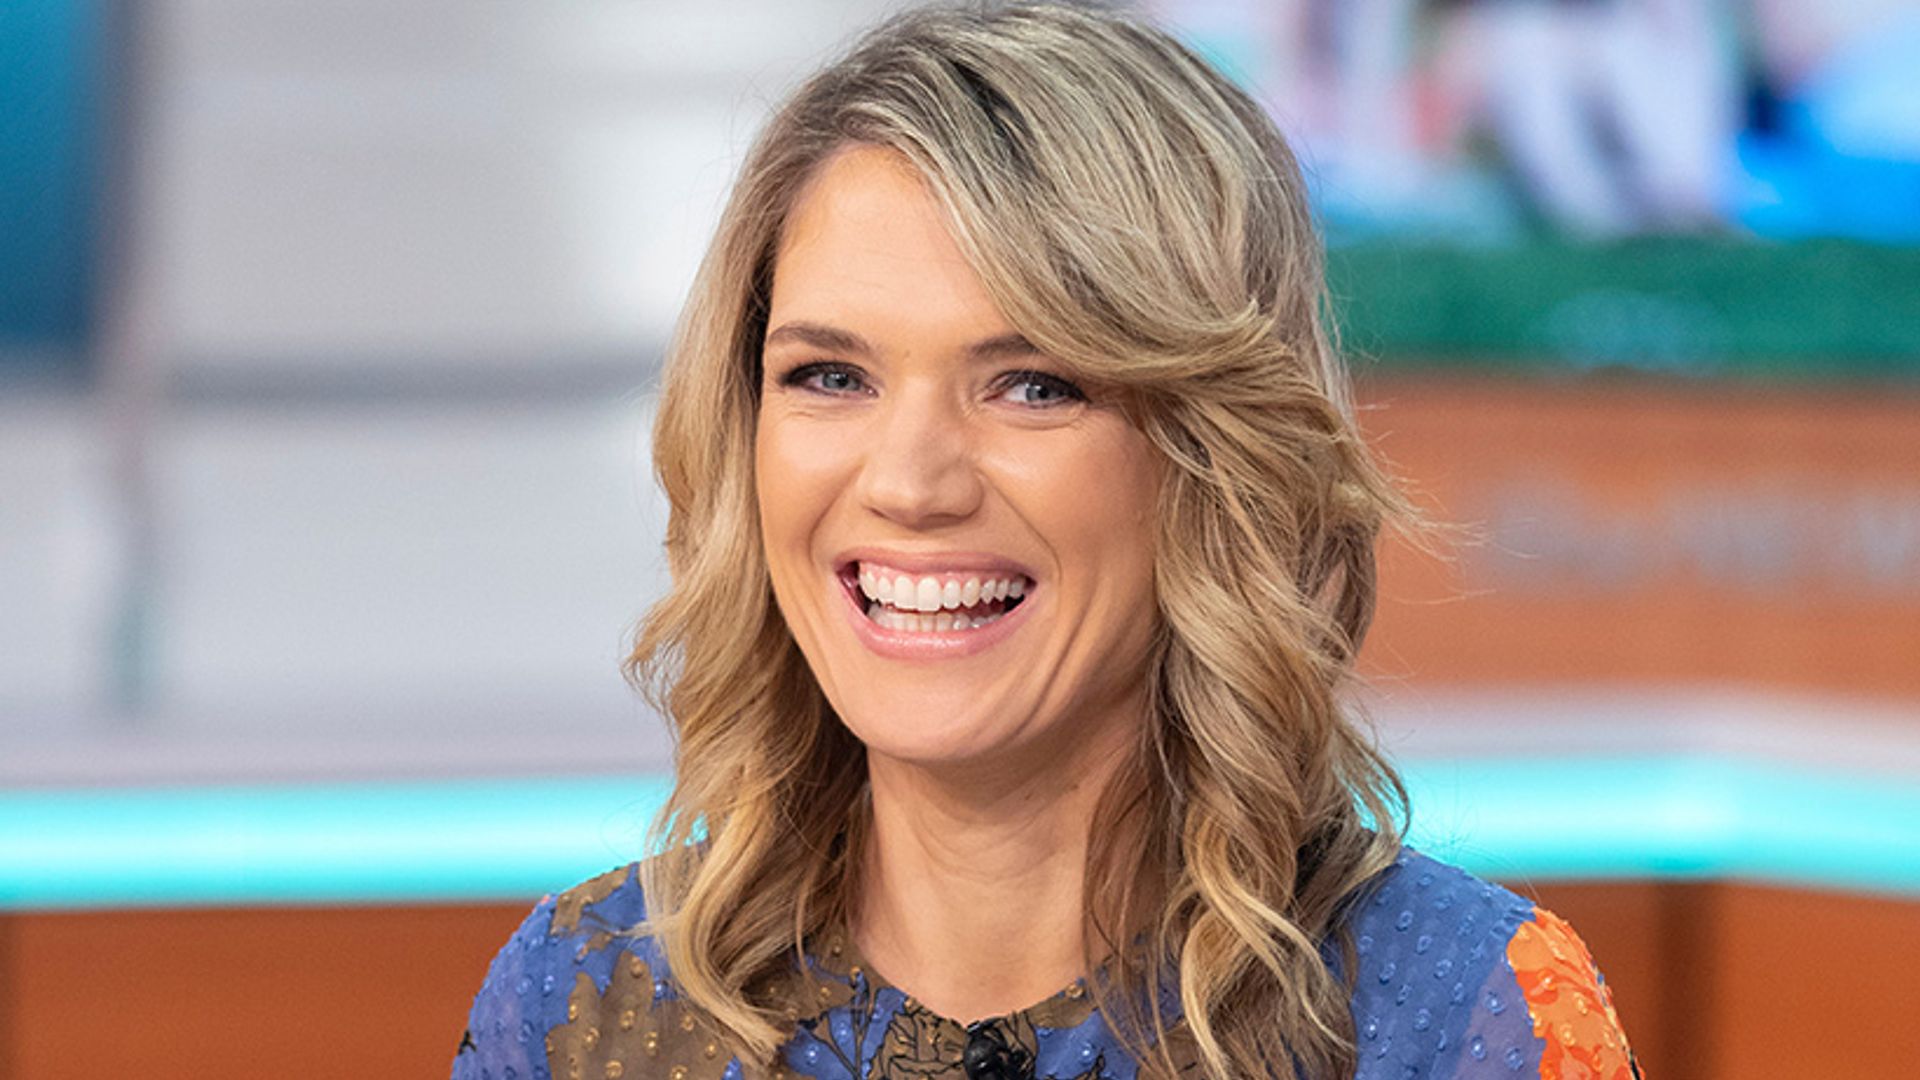 Fans say Charlotte Hawkins 'should have been a royal' after seeing her latest races outfit